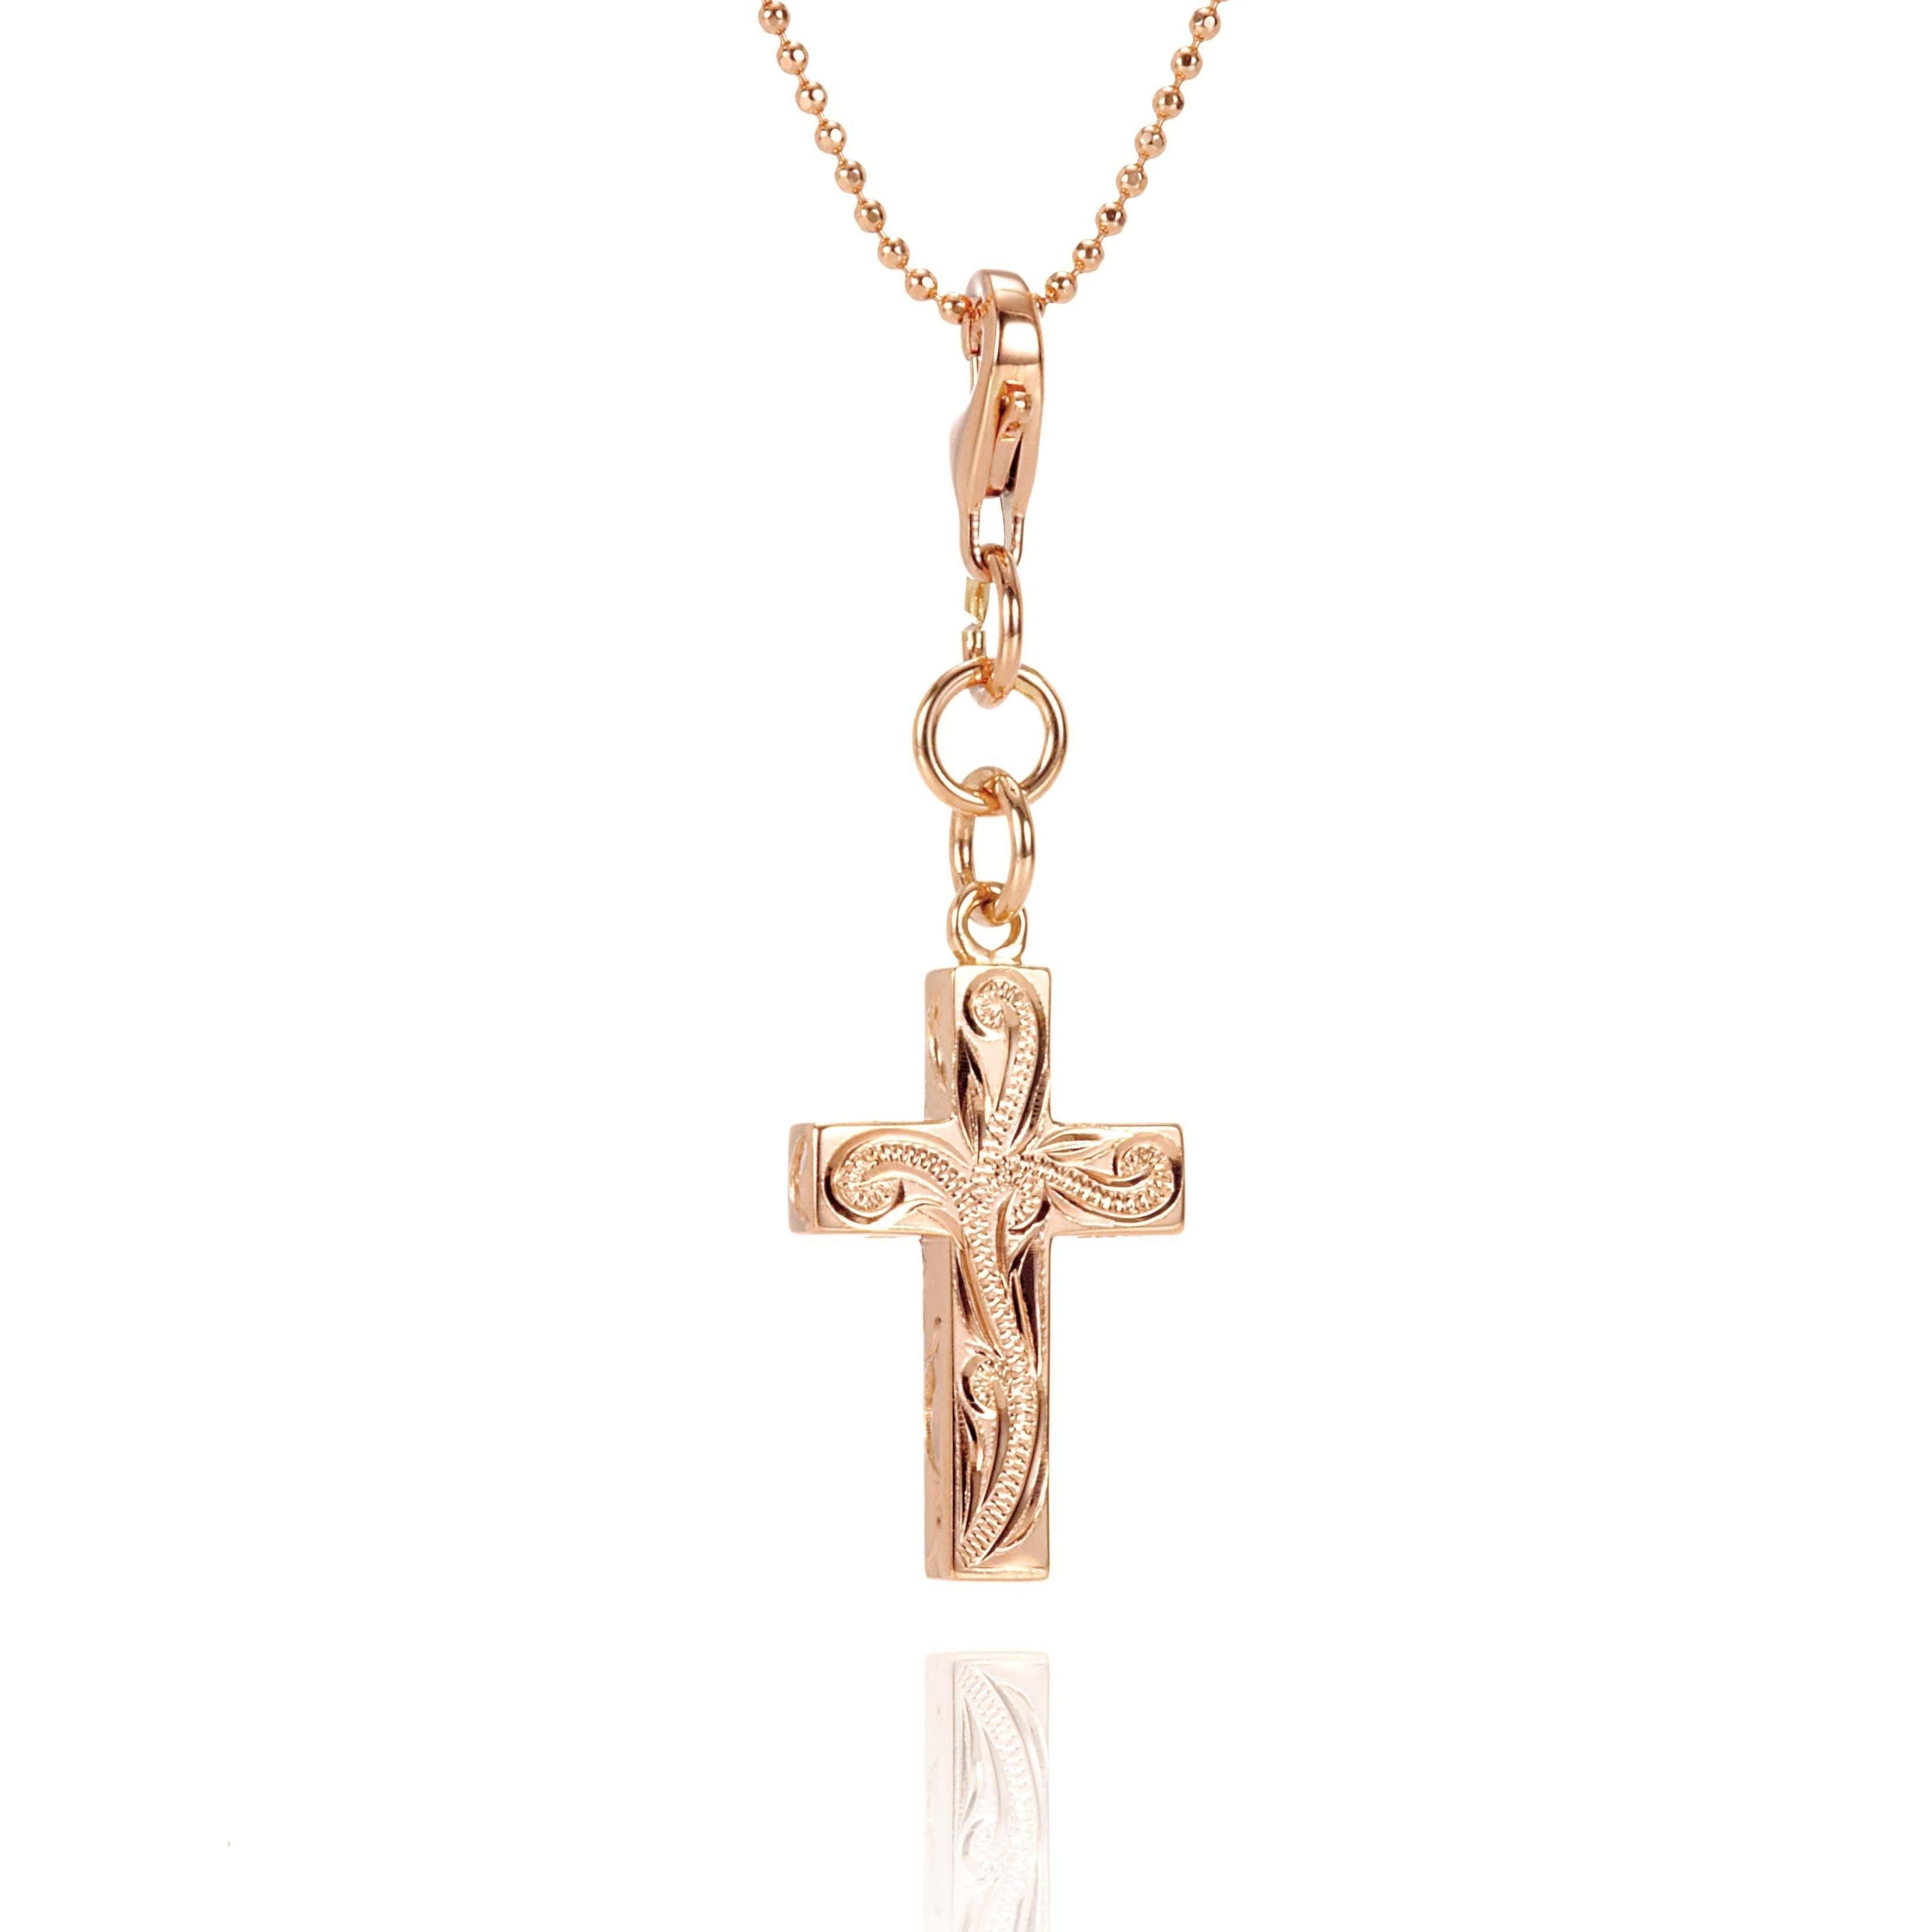 The picture shows a 14K yellow gold cross charm with hand-engraved detailing.